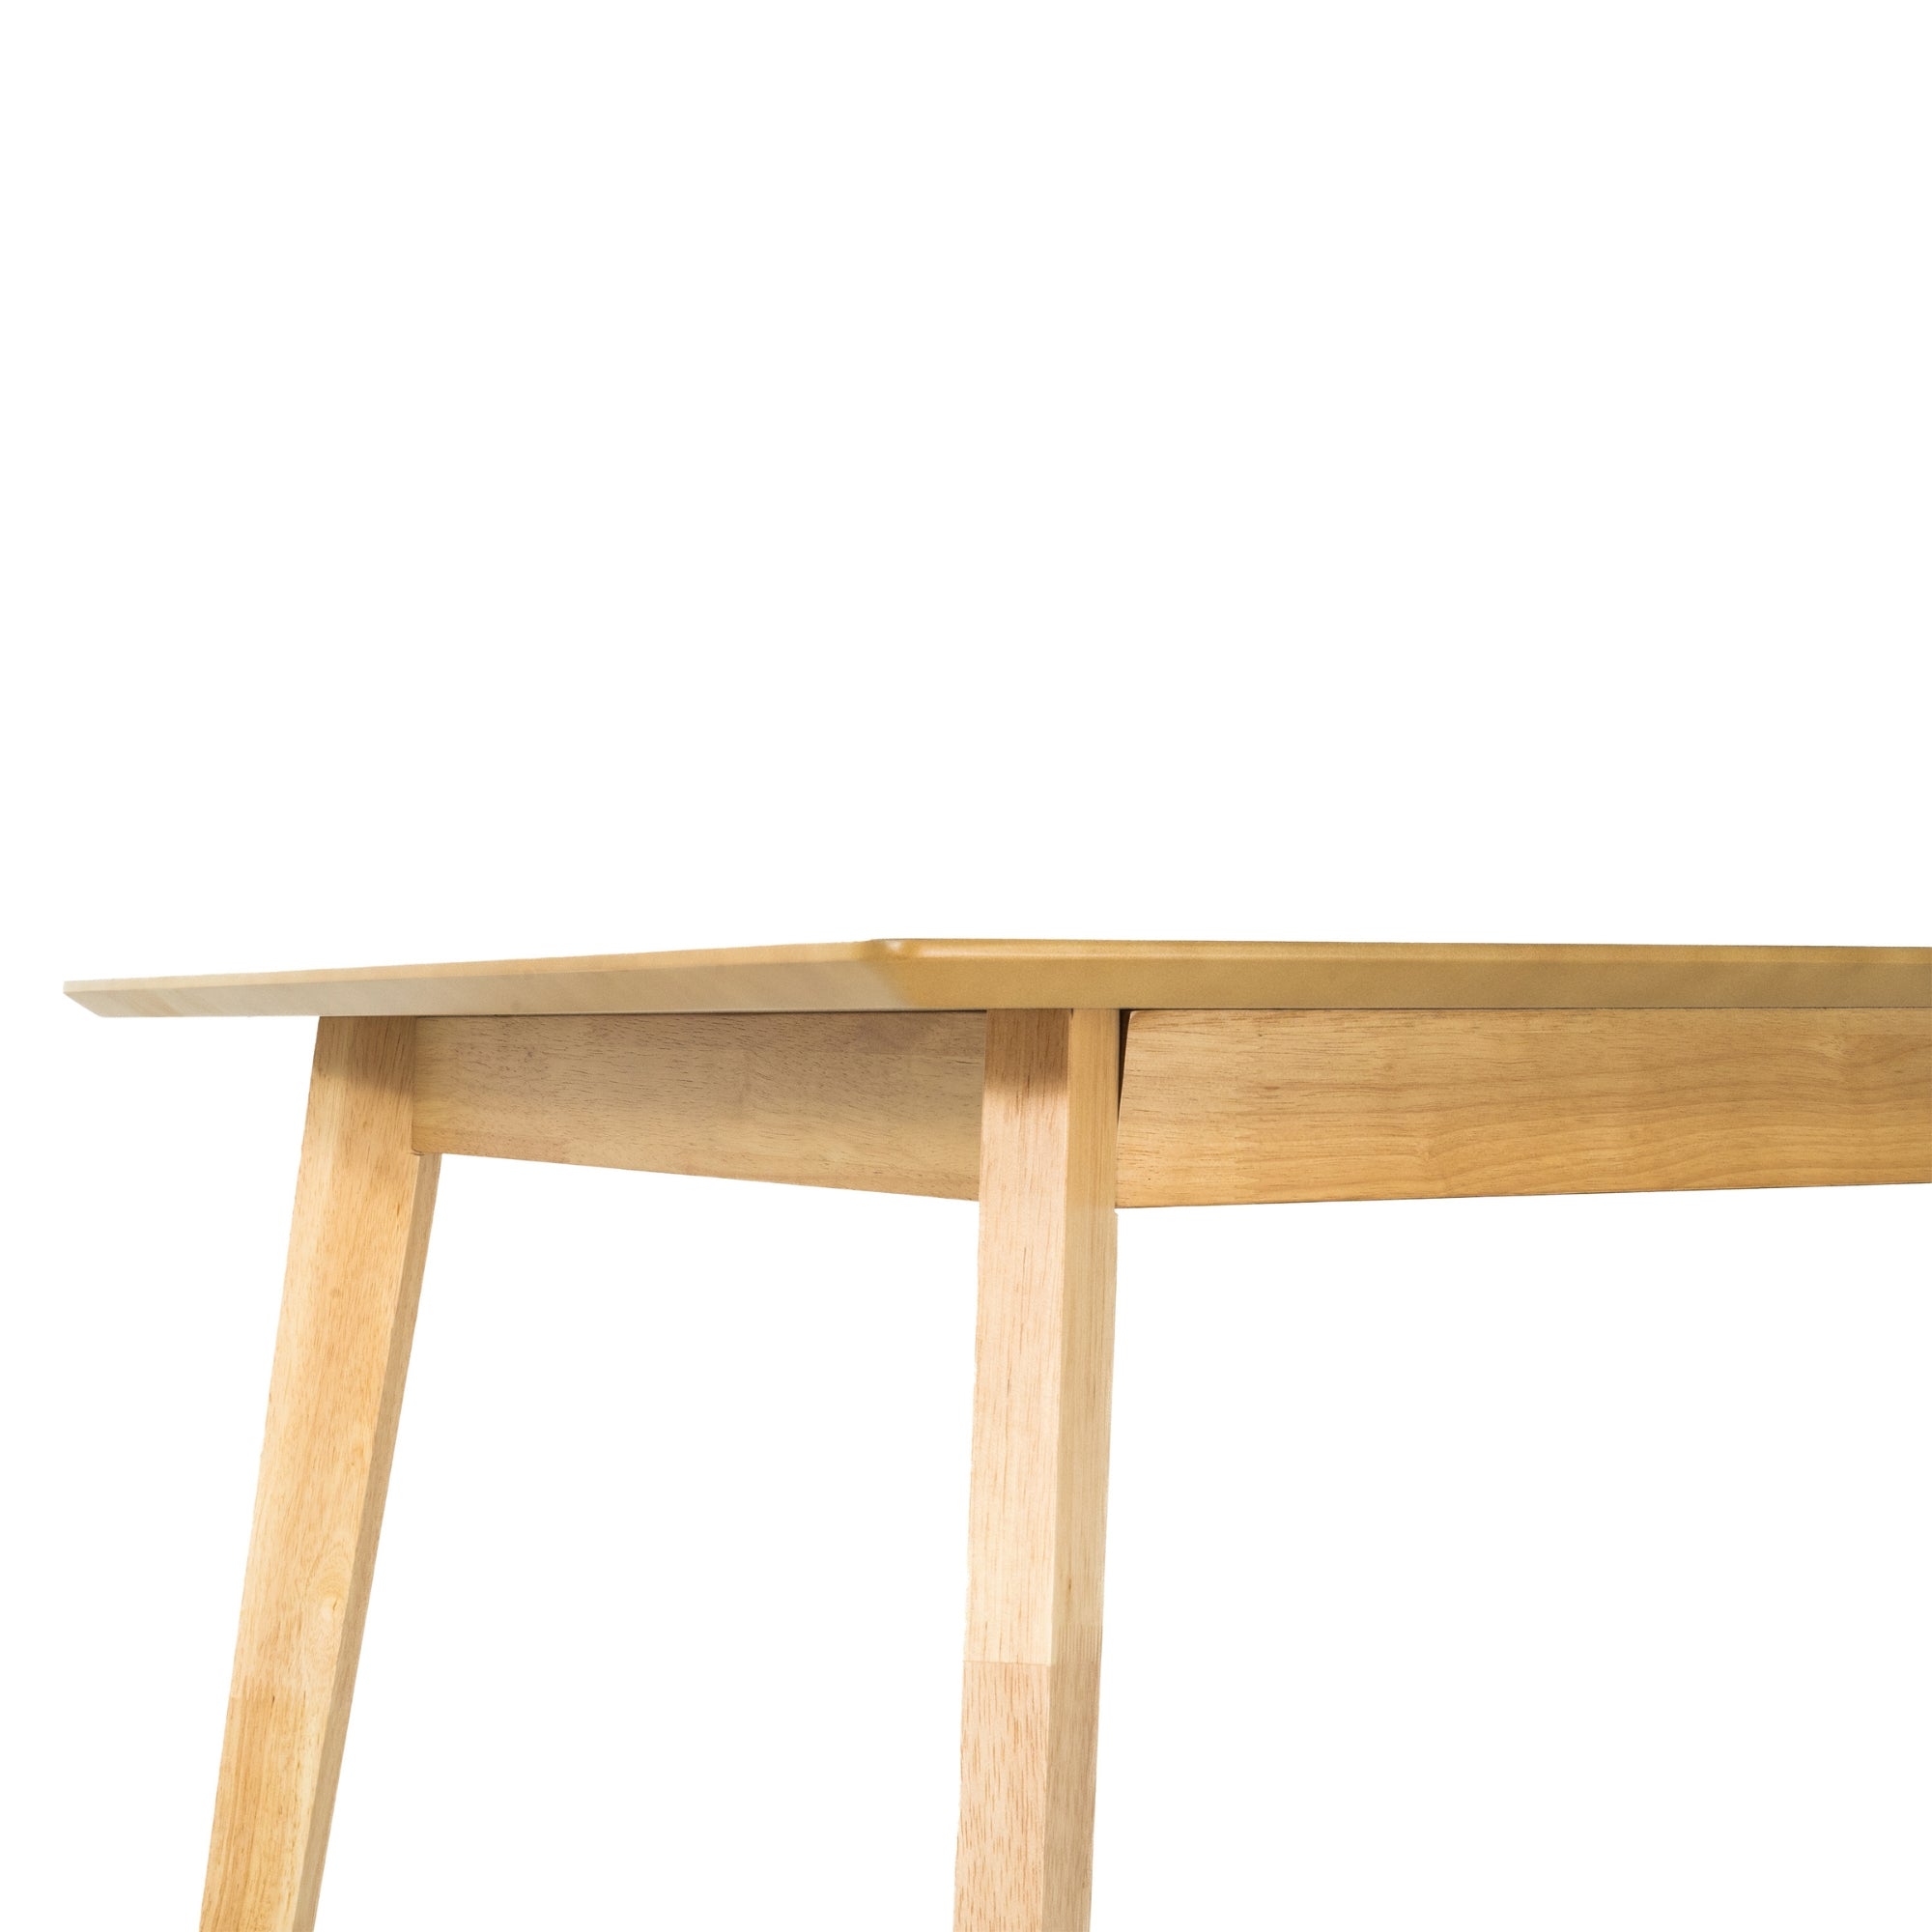 6-Seater Solid Rubberwood Dining Table, Scandinavian Style